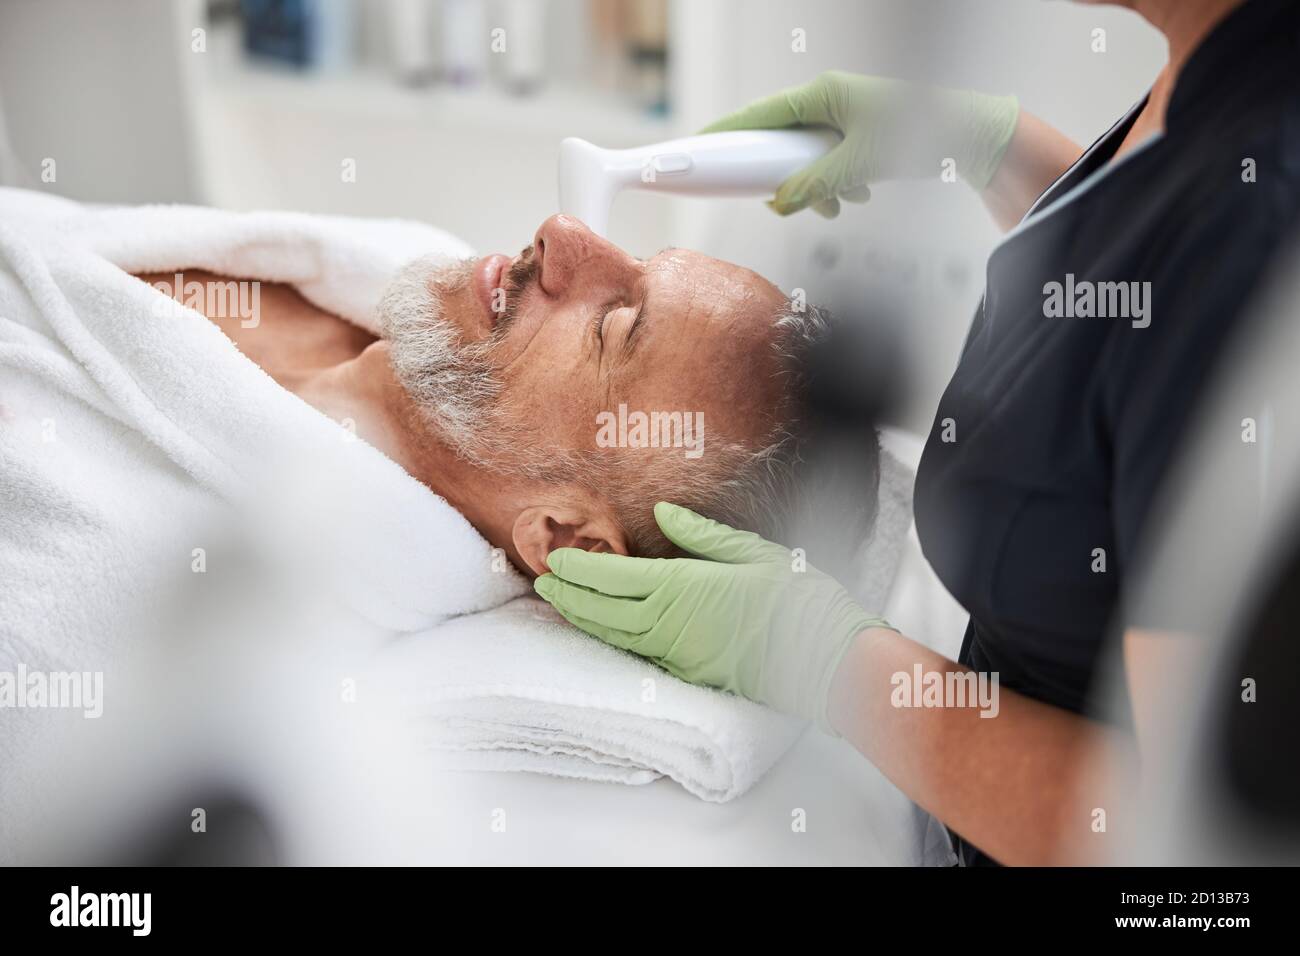 Aging man looking chilled at a skincare treatment session Stock Photo